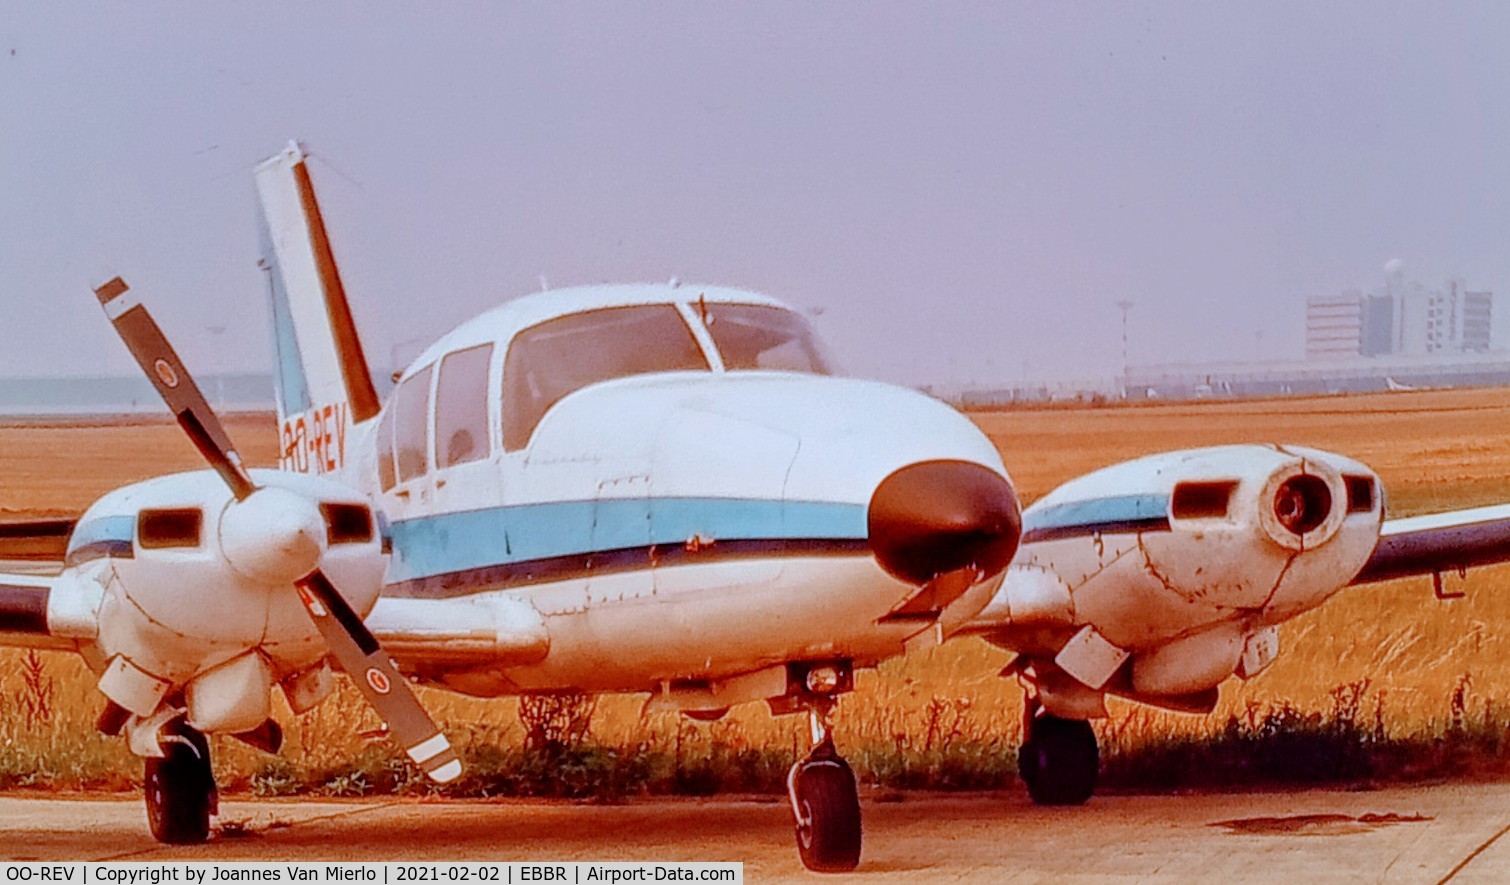 OO-REV, 1975 Piper PA-23-250 Turbo Aztec E C/N 27-7554022, Scan from slide